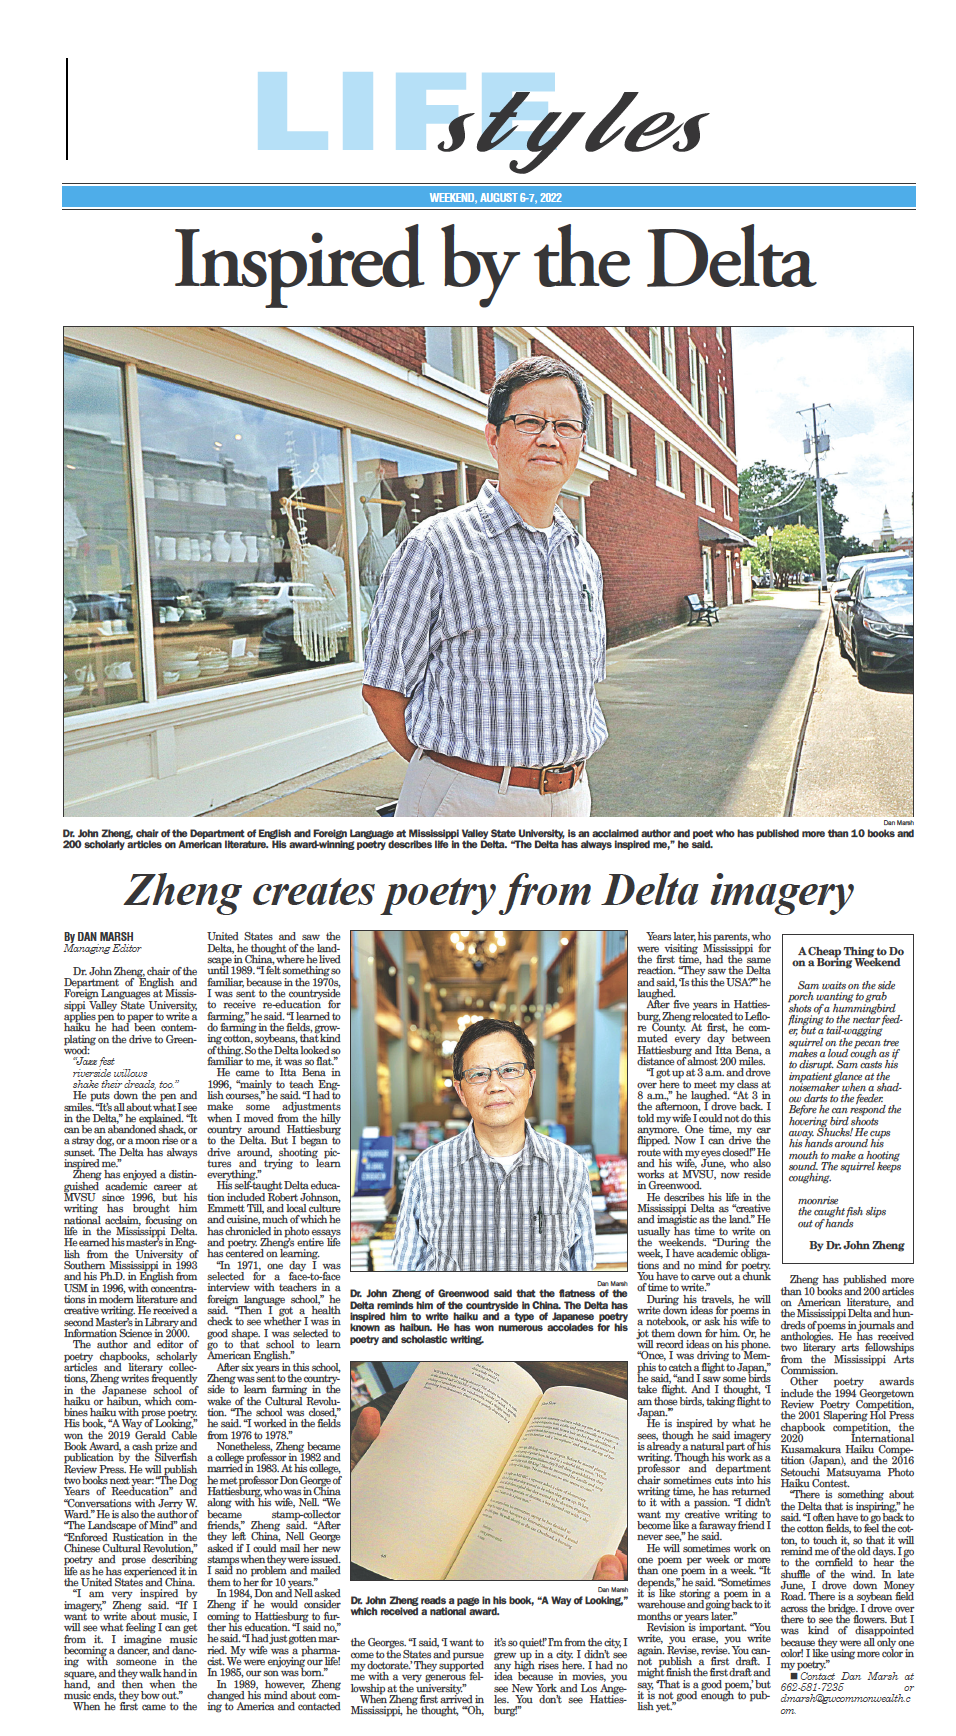 An Interview of author Jianqing Zheng for Lifestyles, entitled "Inspired by the Delta." Screen capture of article shows Zheng in a blue and white plaid shirt standing on a Mississippi street. He is an Asian man with glasses of middle age. His face is round and pleasant. 